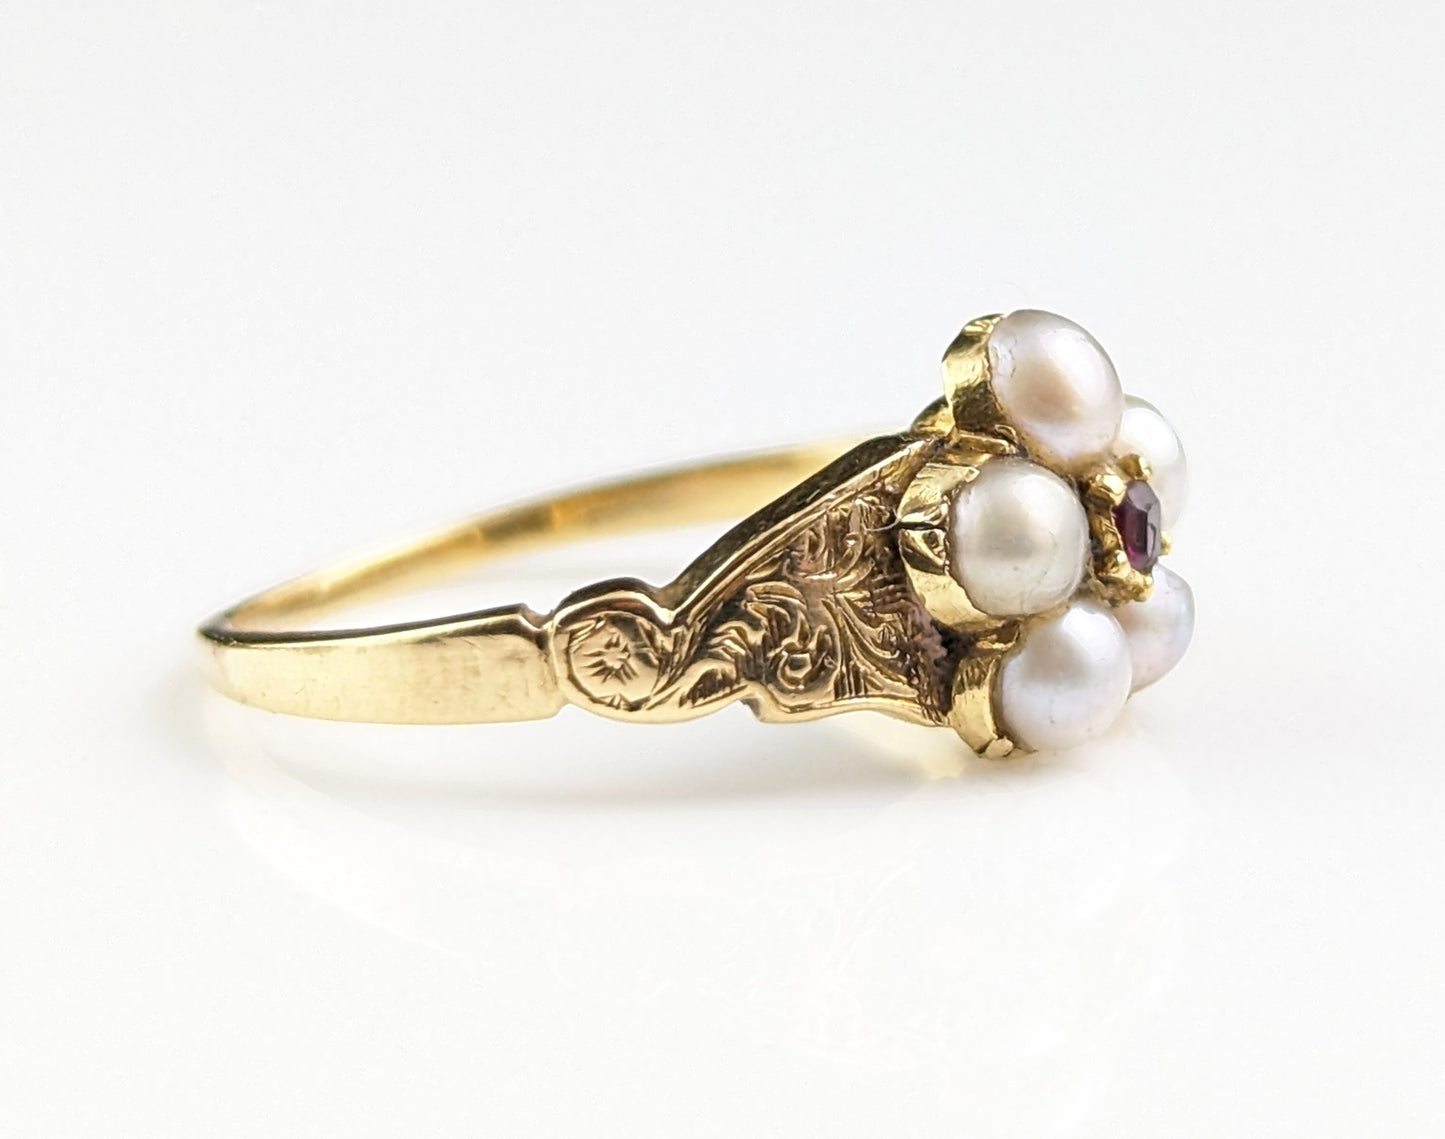 Antique Split pearl and Ruby flower ring, 18ct gold, locket back